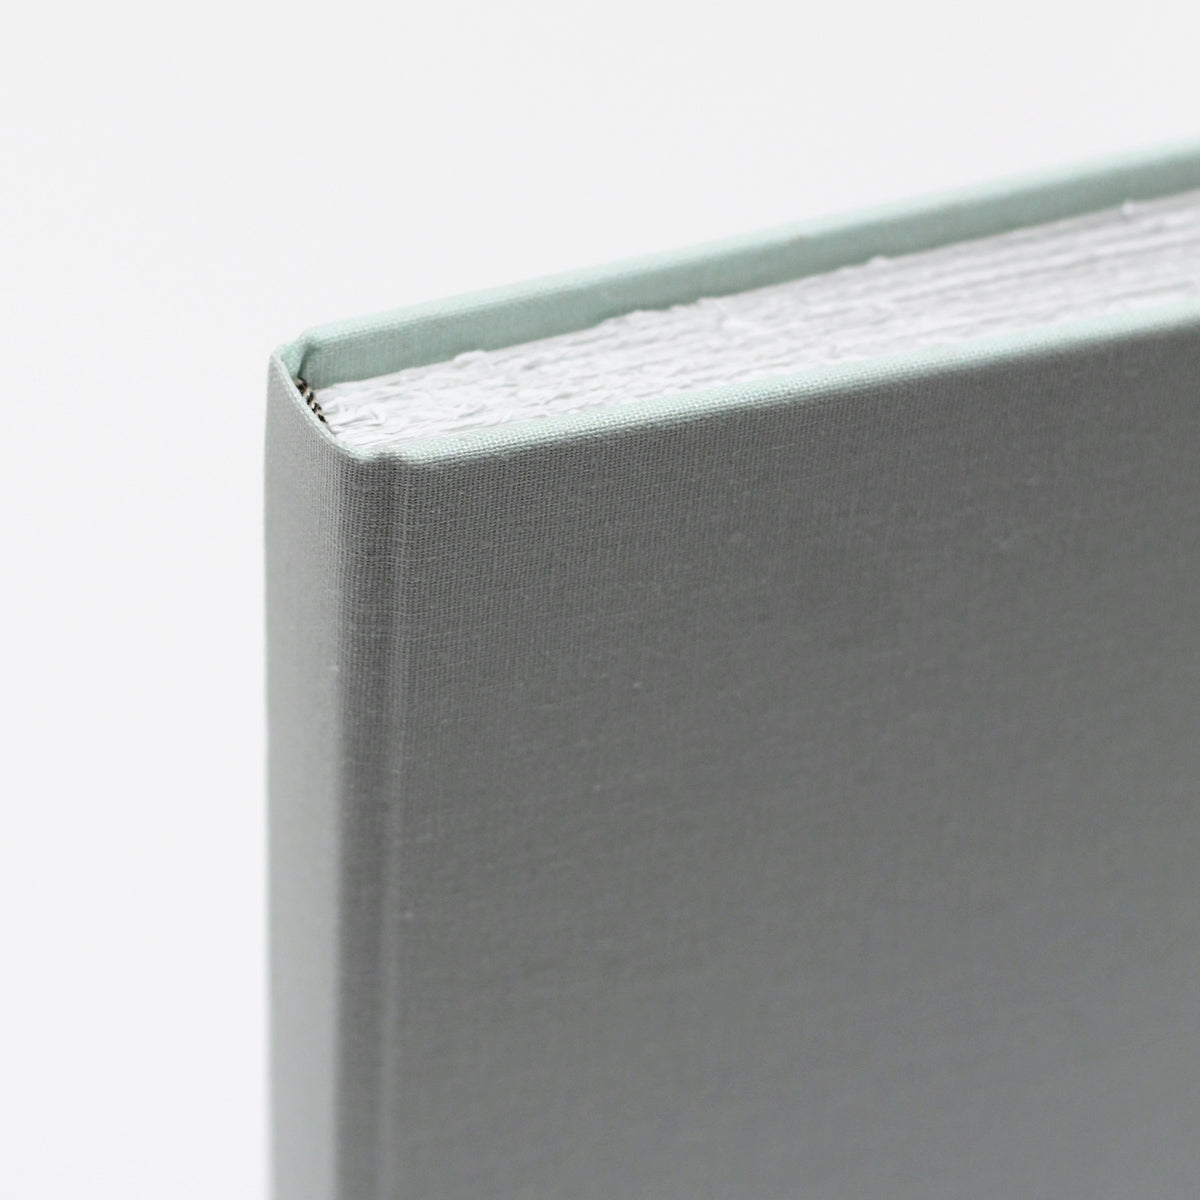 Medium 5.5x8.5 Blank Page Journal | Cover: Pastel Blue Cotton | Available Personalized